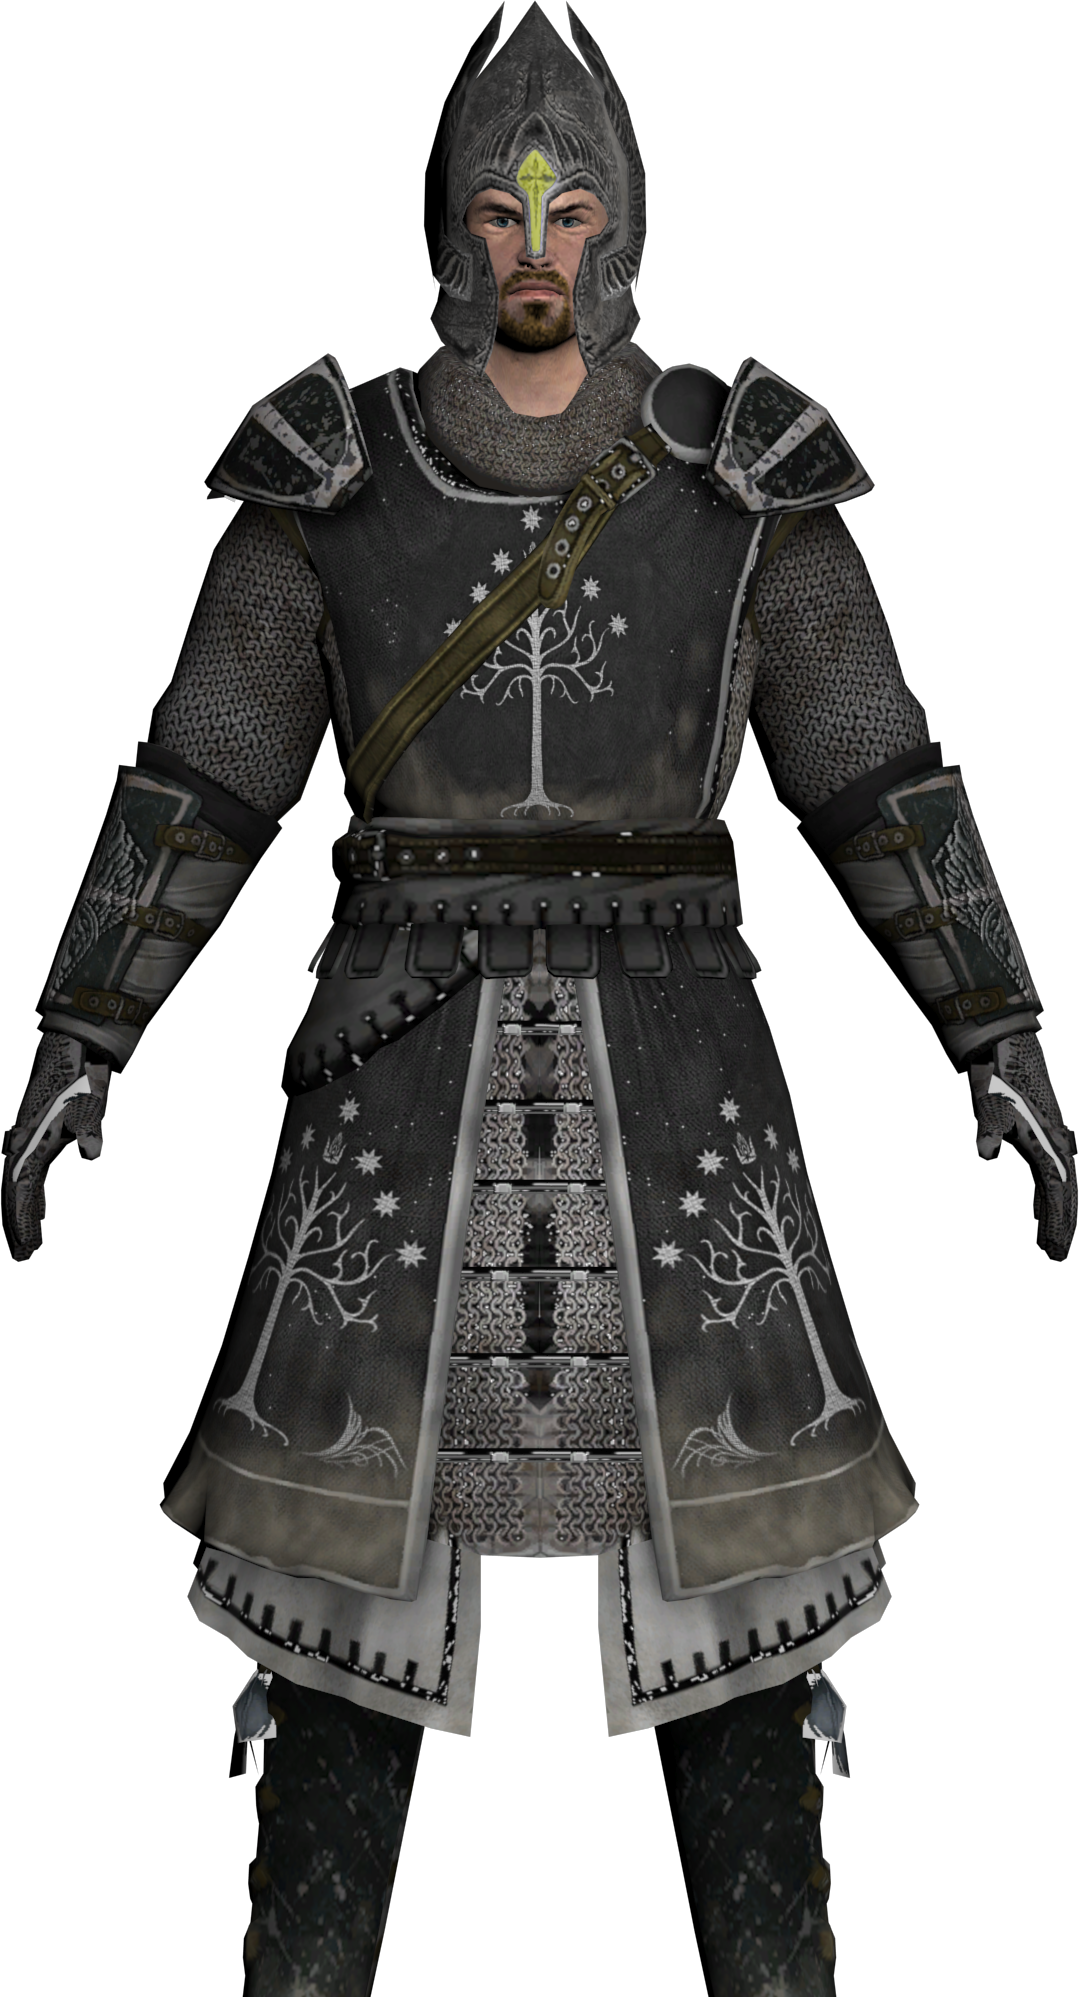 Black Gondorian Armour image - Legends of Middle-Earth 5.0 mod for Age